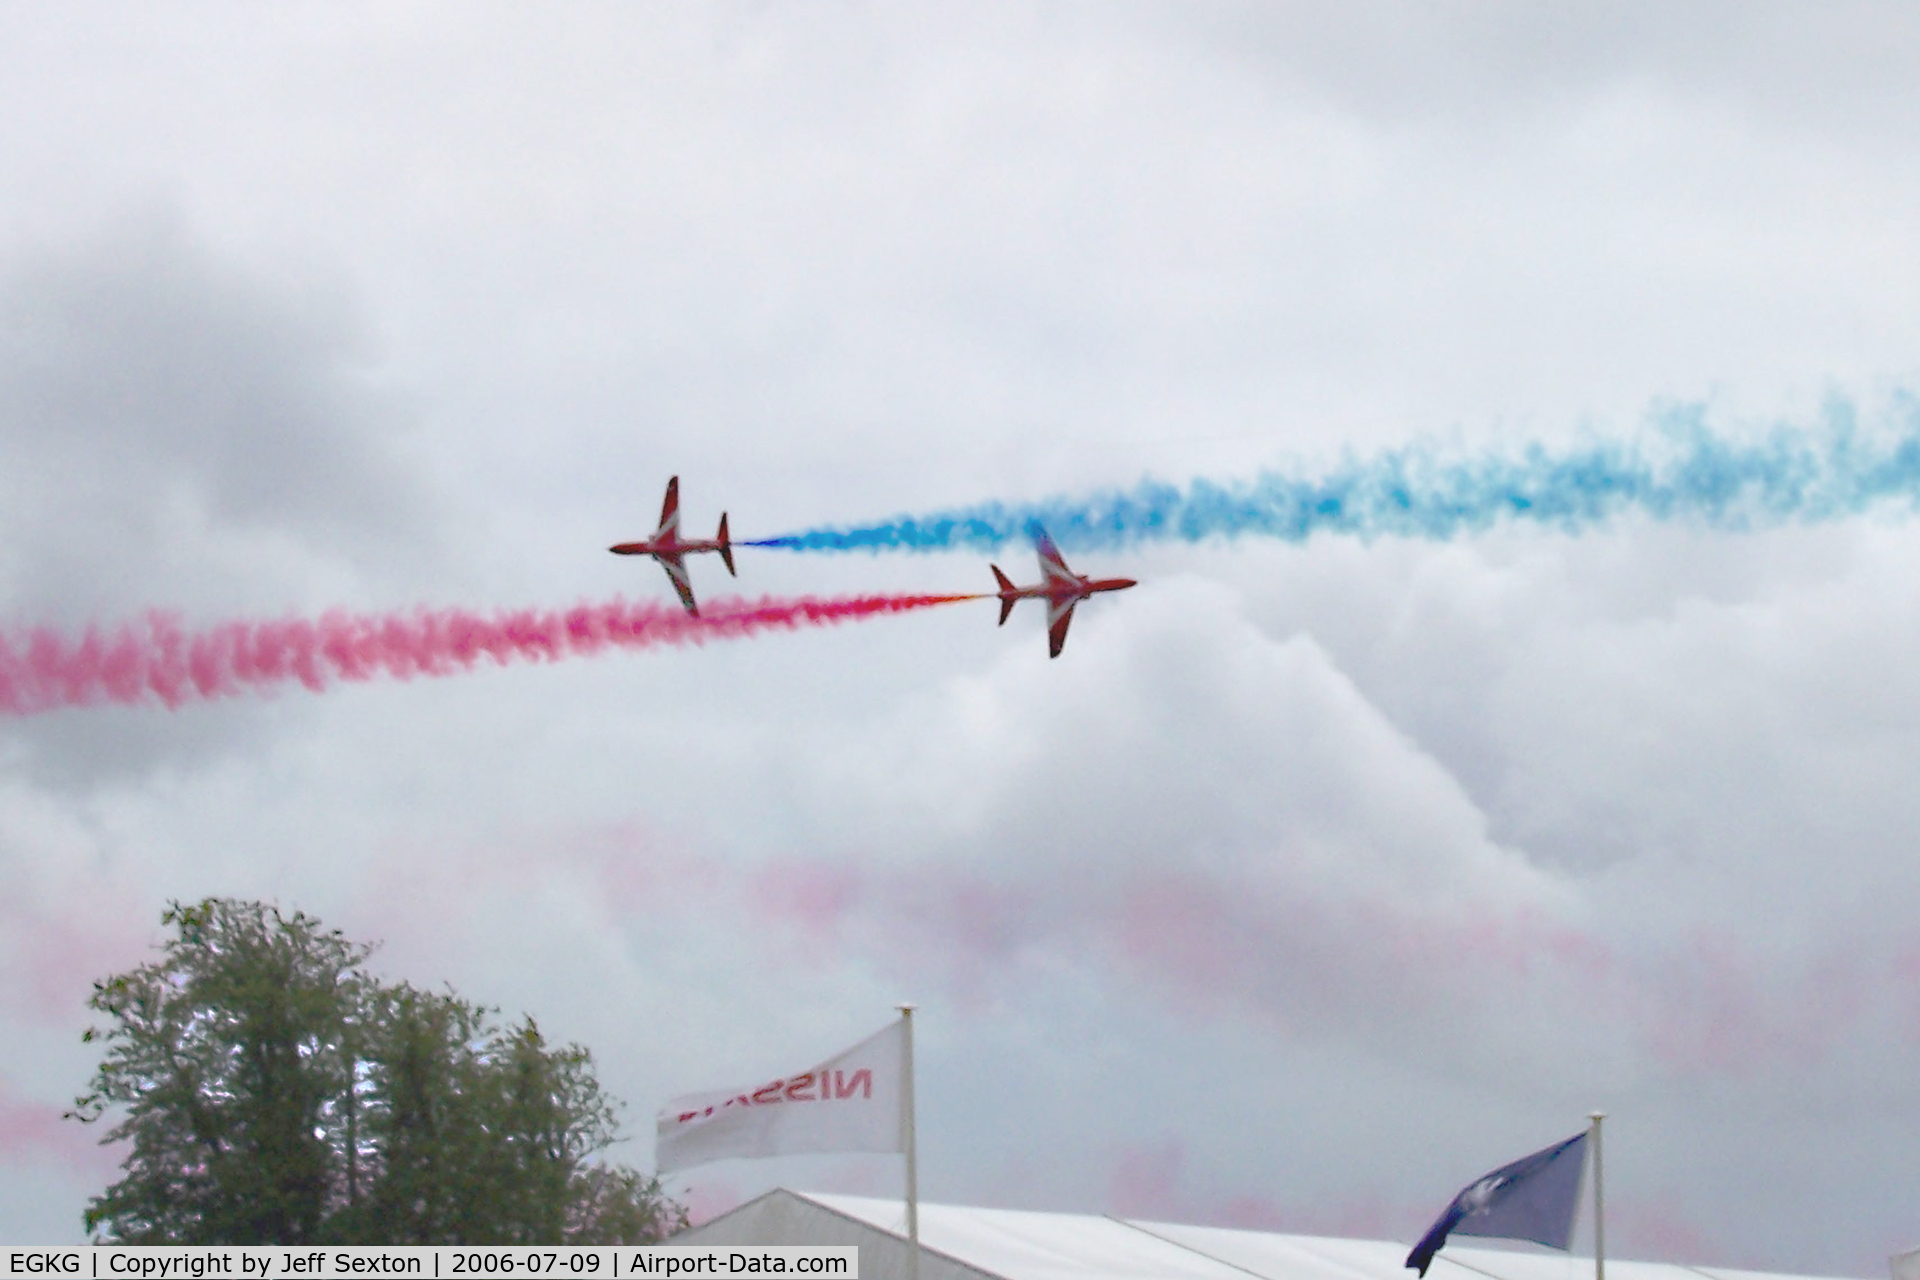 Goodwood Racecourse Heliport Airport, Goodwood Racecourse, England United Kingdom (EGKG) - Royal Air Force Red Arrows Display Team at 2006 Goodwood Festival of Speed. BAe Hawk Aircraft